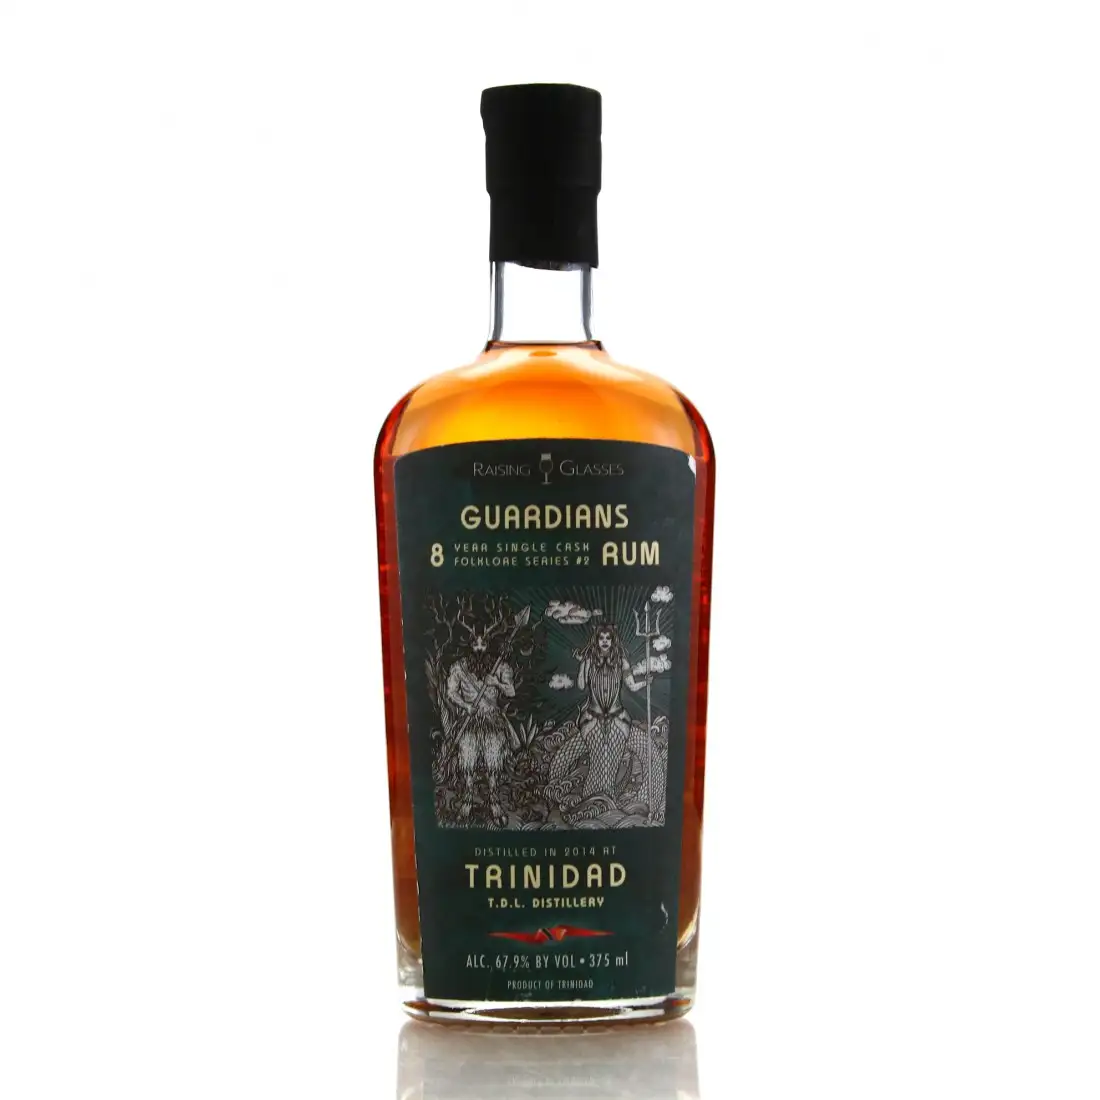 Image of the front of the bottle of the rum Guardians (Folklore Series #2)